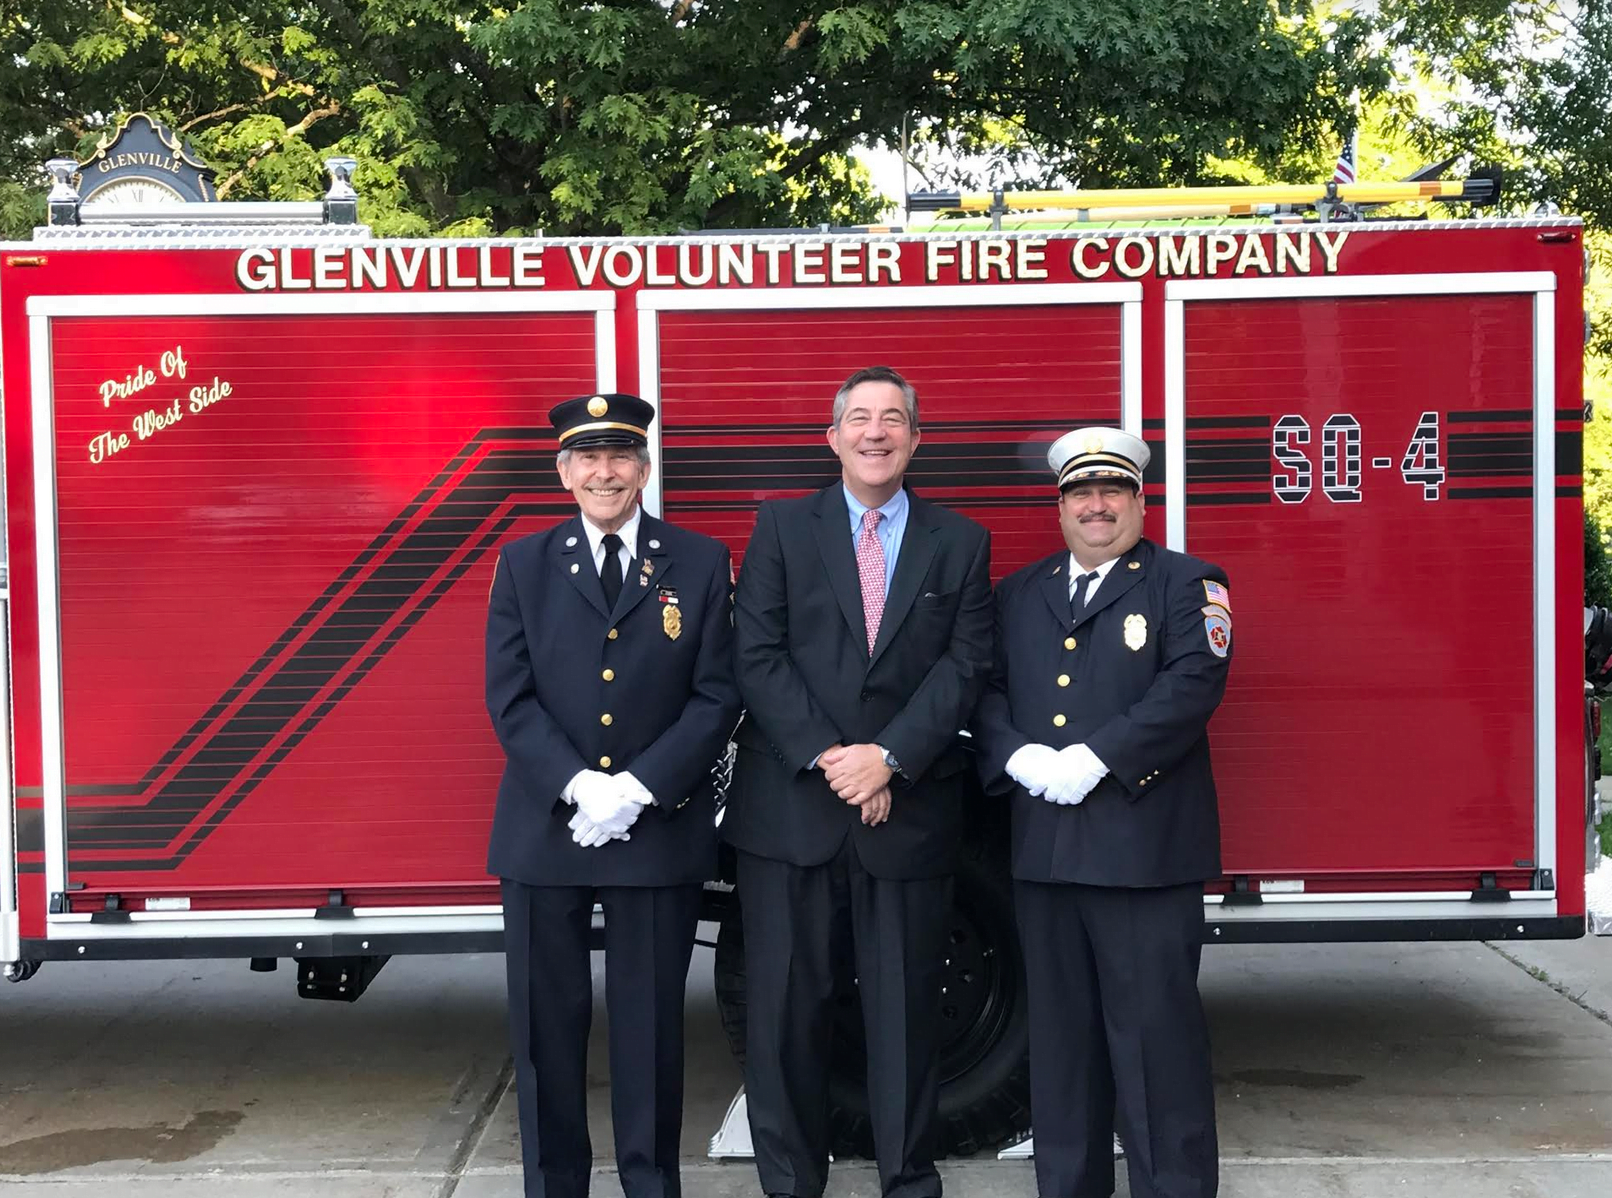 The Glenville Volunteer Fire Company will honor Greenwich civic leader and philanthropist Ed Dadakis at its annual fundraising event on Thursday, October 4, 2018, at Tamarack Country Club. (Left to Right) GVFC President, Sanford Cohen, honoree, Edward Dadakis and GVFC Chief, Michael Hoha.